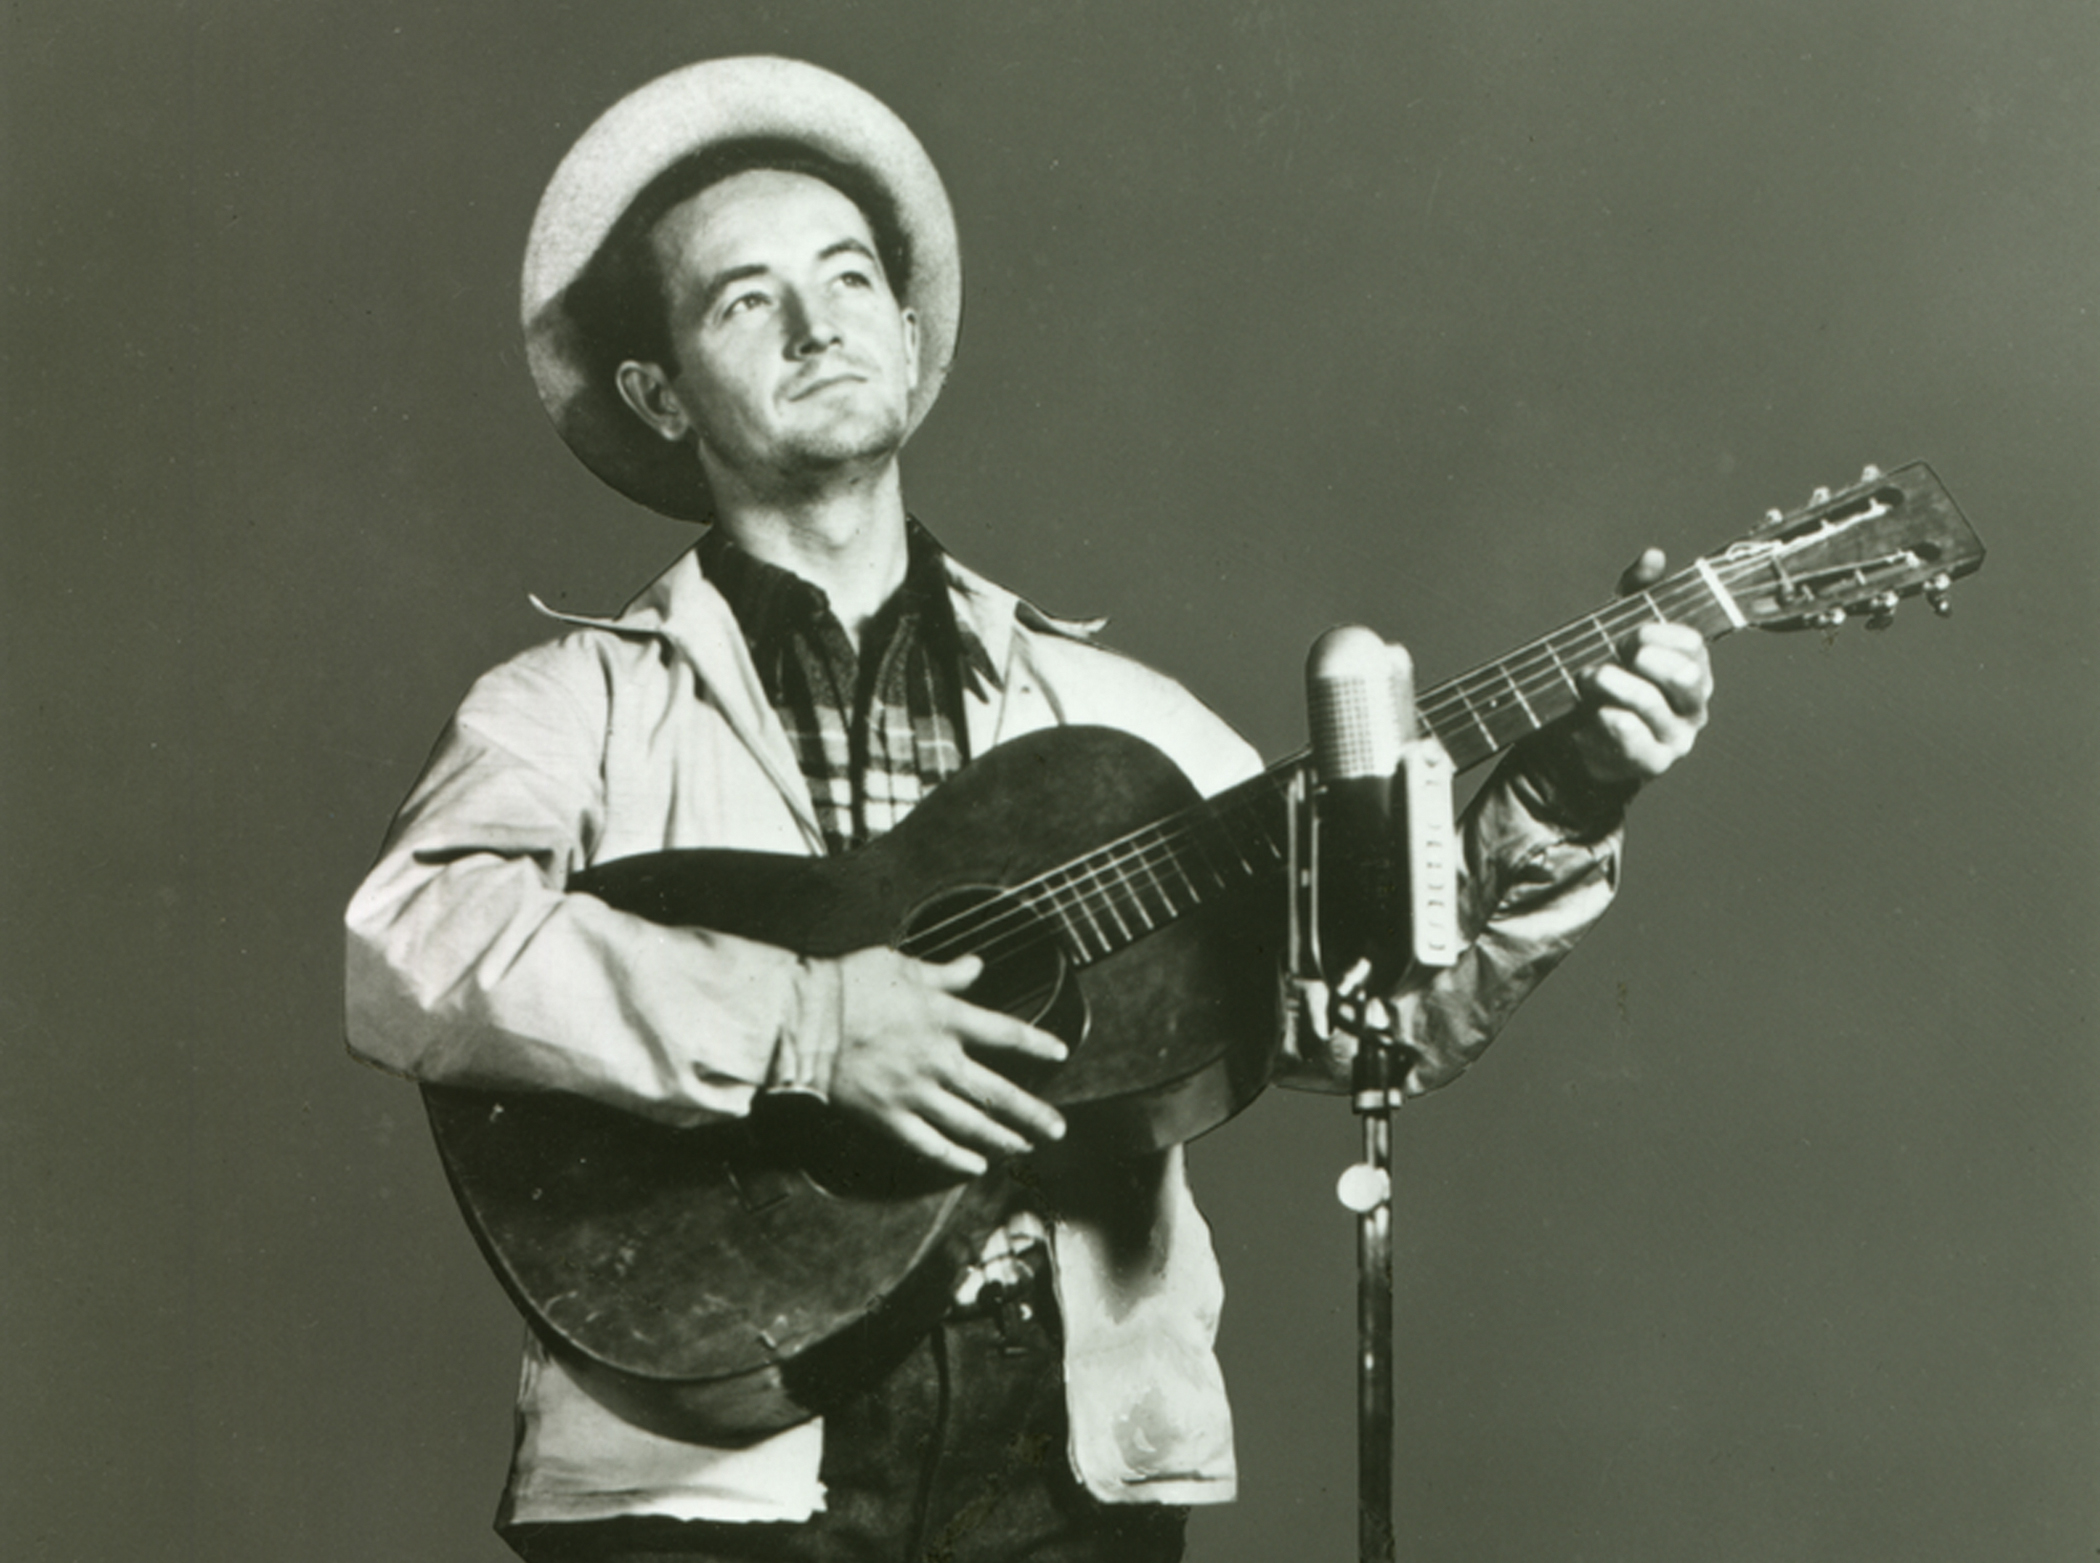 Woody Guthrie performing on “Back Where I Come From” radio show, WABC-CBS. New York City, 1940.